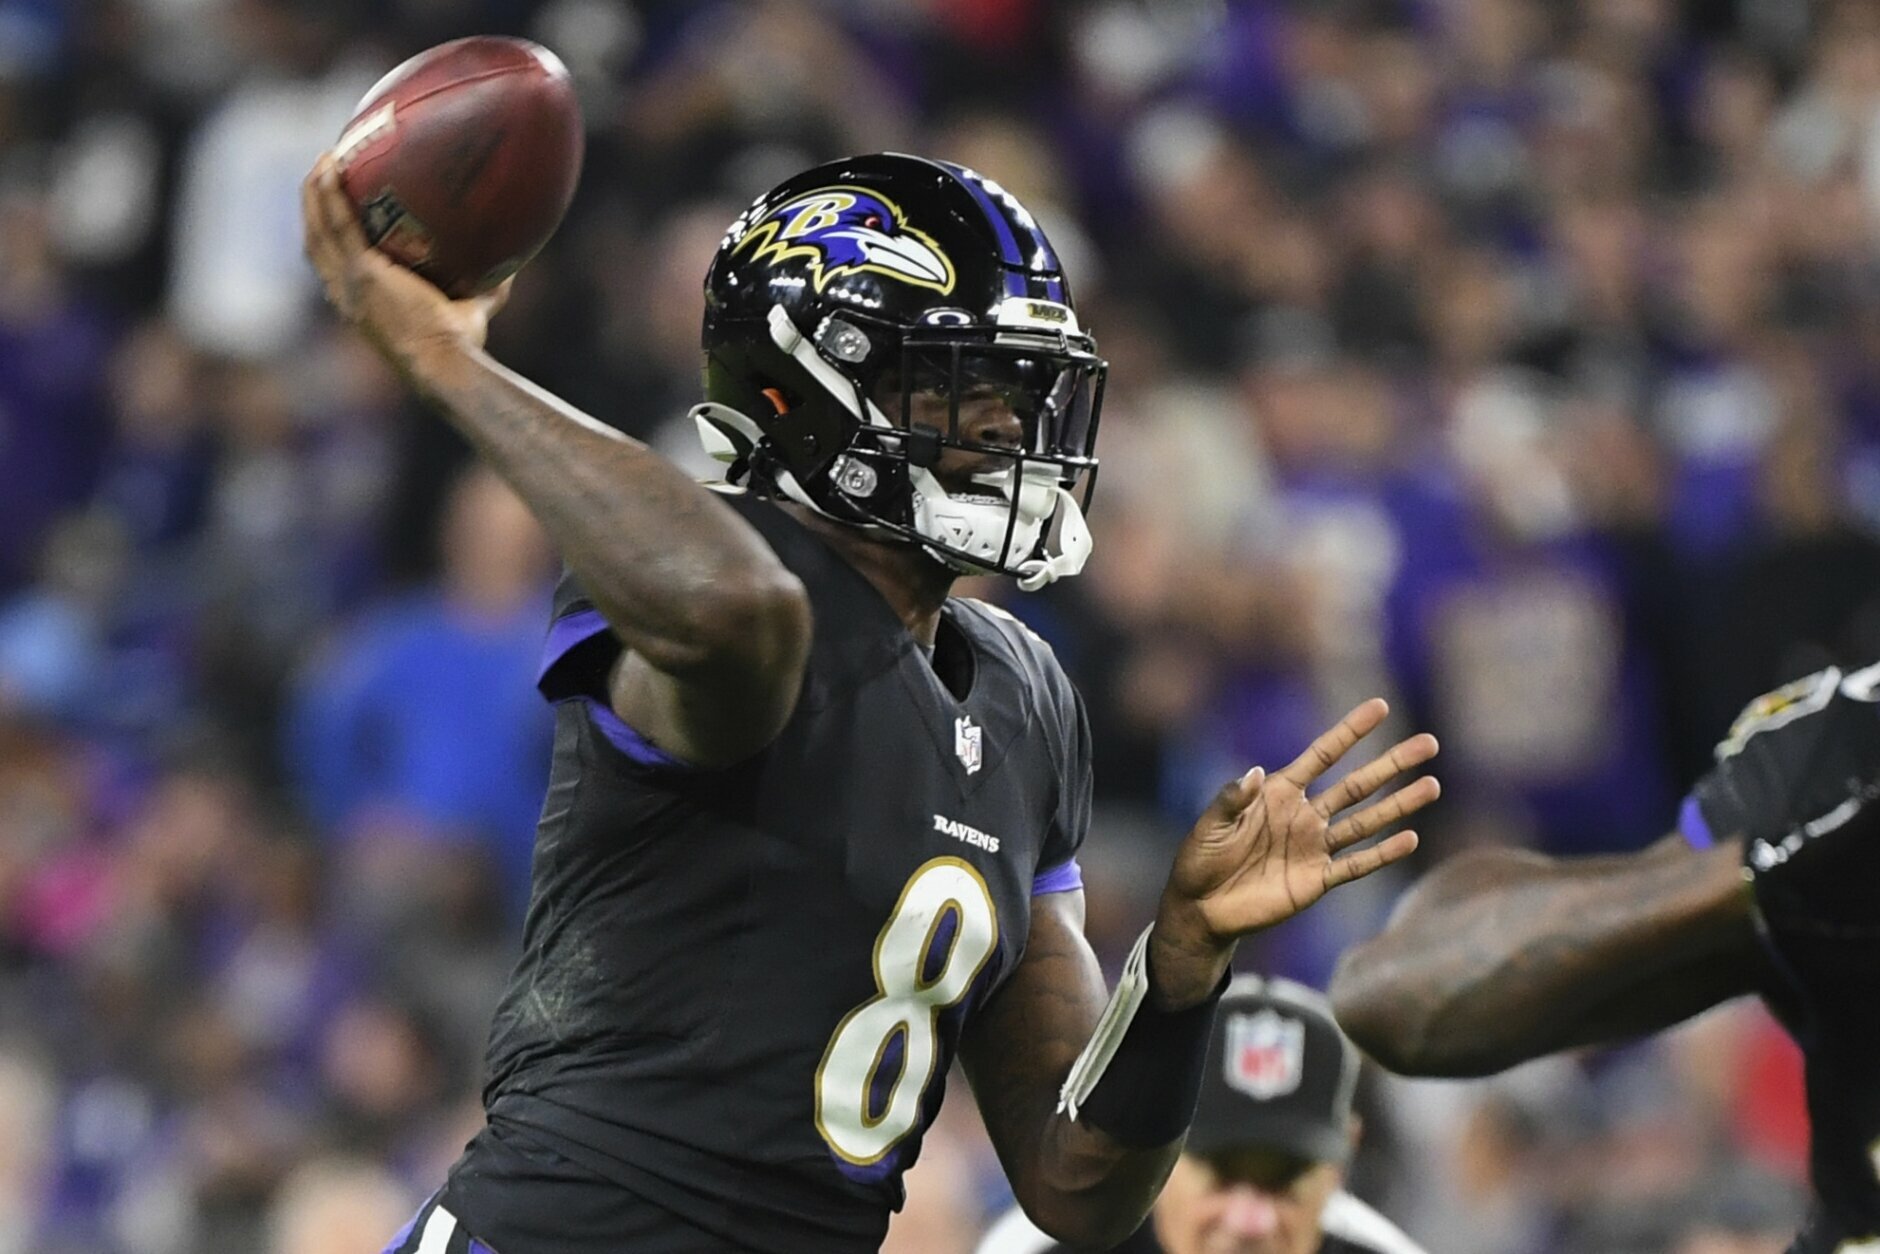 <p><b>MVP: Lamar Jackson</b></p>
<p>I rest my case from what I said in the Offensive Player of the Year entry. Also, I&#8217;d like to nominate myself as the replacement for the departed <a href="https://www.youtube.com/watch?v=AwhHpMIqW9g" target="_blank" rel="noopener" data-saferedirecturl="https://www.google.com/url?q=https://www.youtube.com/watch?v%3DAwhHpMIqW9g&amp;source=gmail&amp;ust=1636502509475000&amp;usg=AFQjCNHwx2t1aTHTF6iQekJc5pecO84grQ">Mark Ingram&#8217;s role as Jackson&#8217;s hype man</a>.</p>
<p><i>Honorable mention: Dak Prescott, Matthew Stafford, Kyler Murray</i></p>
